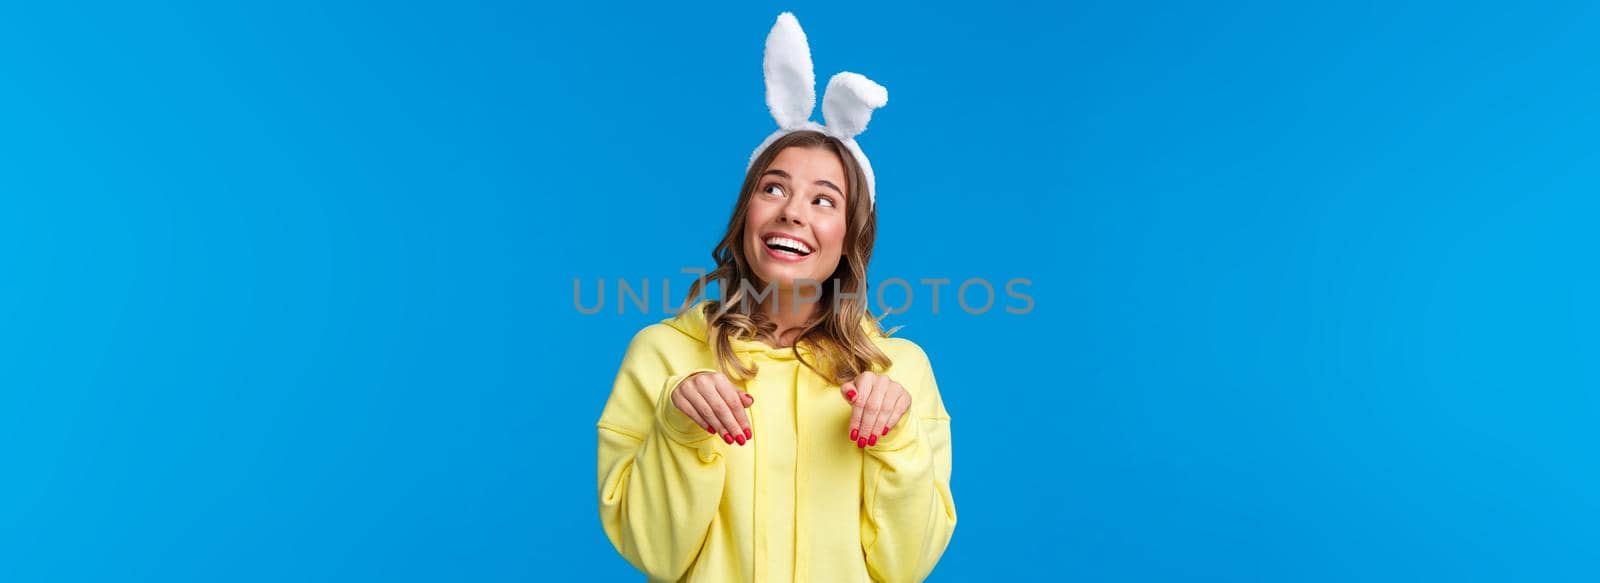 Holidays, traditions and celebration concept. Dreamy and cute young woman smiling lovely with rabbit ears, look upbeat upper right corner grinning make paws gesture, blue background.